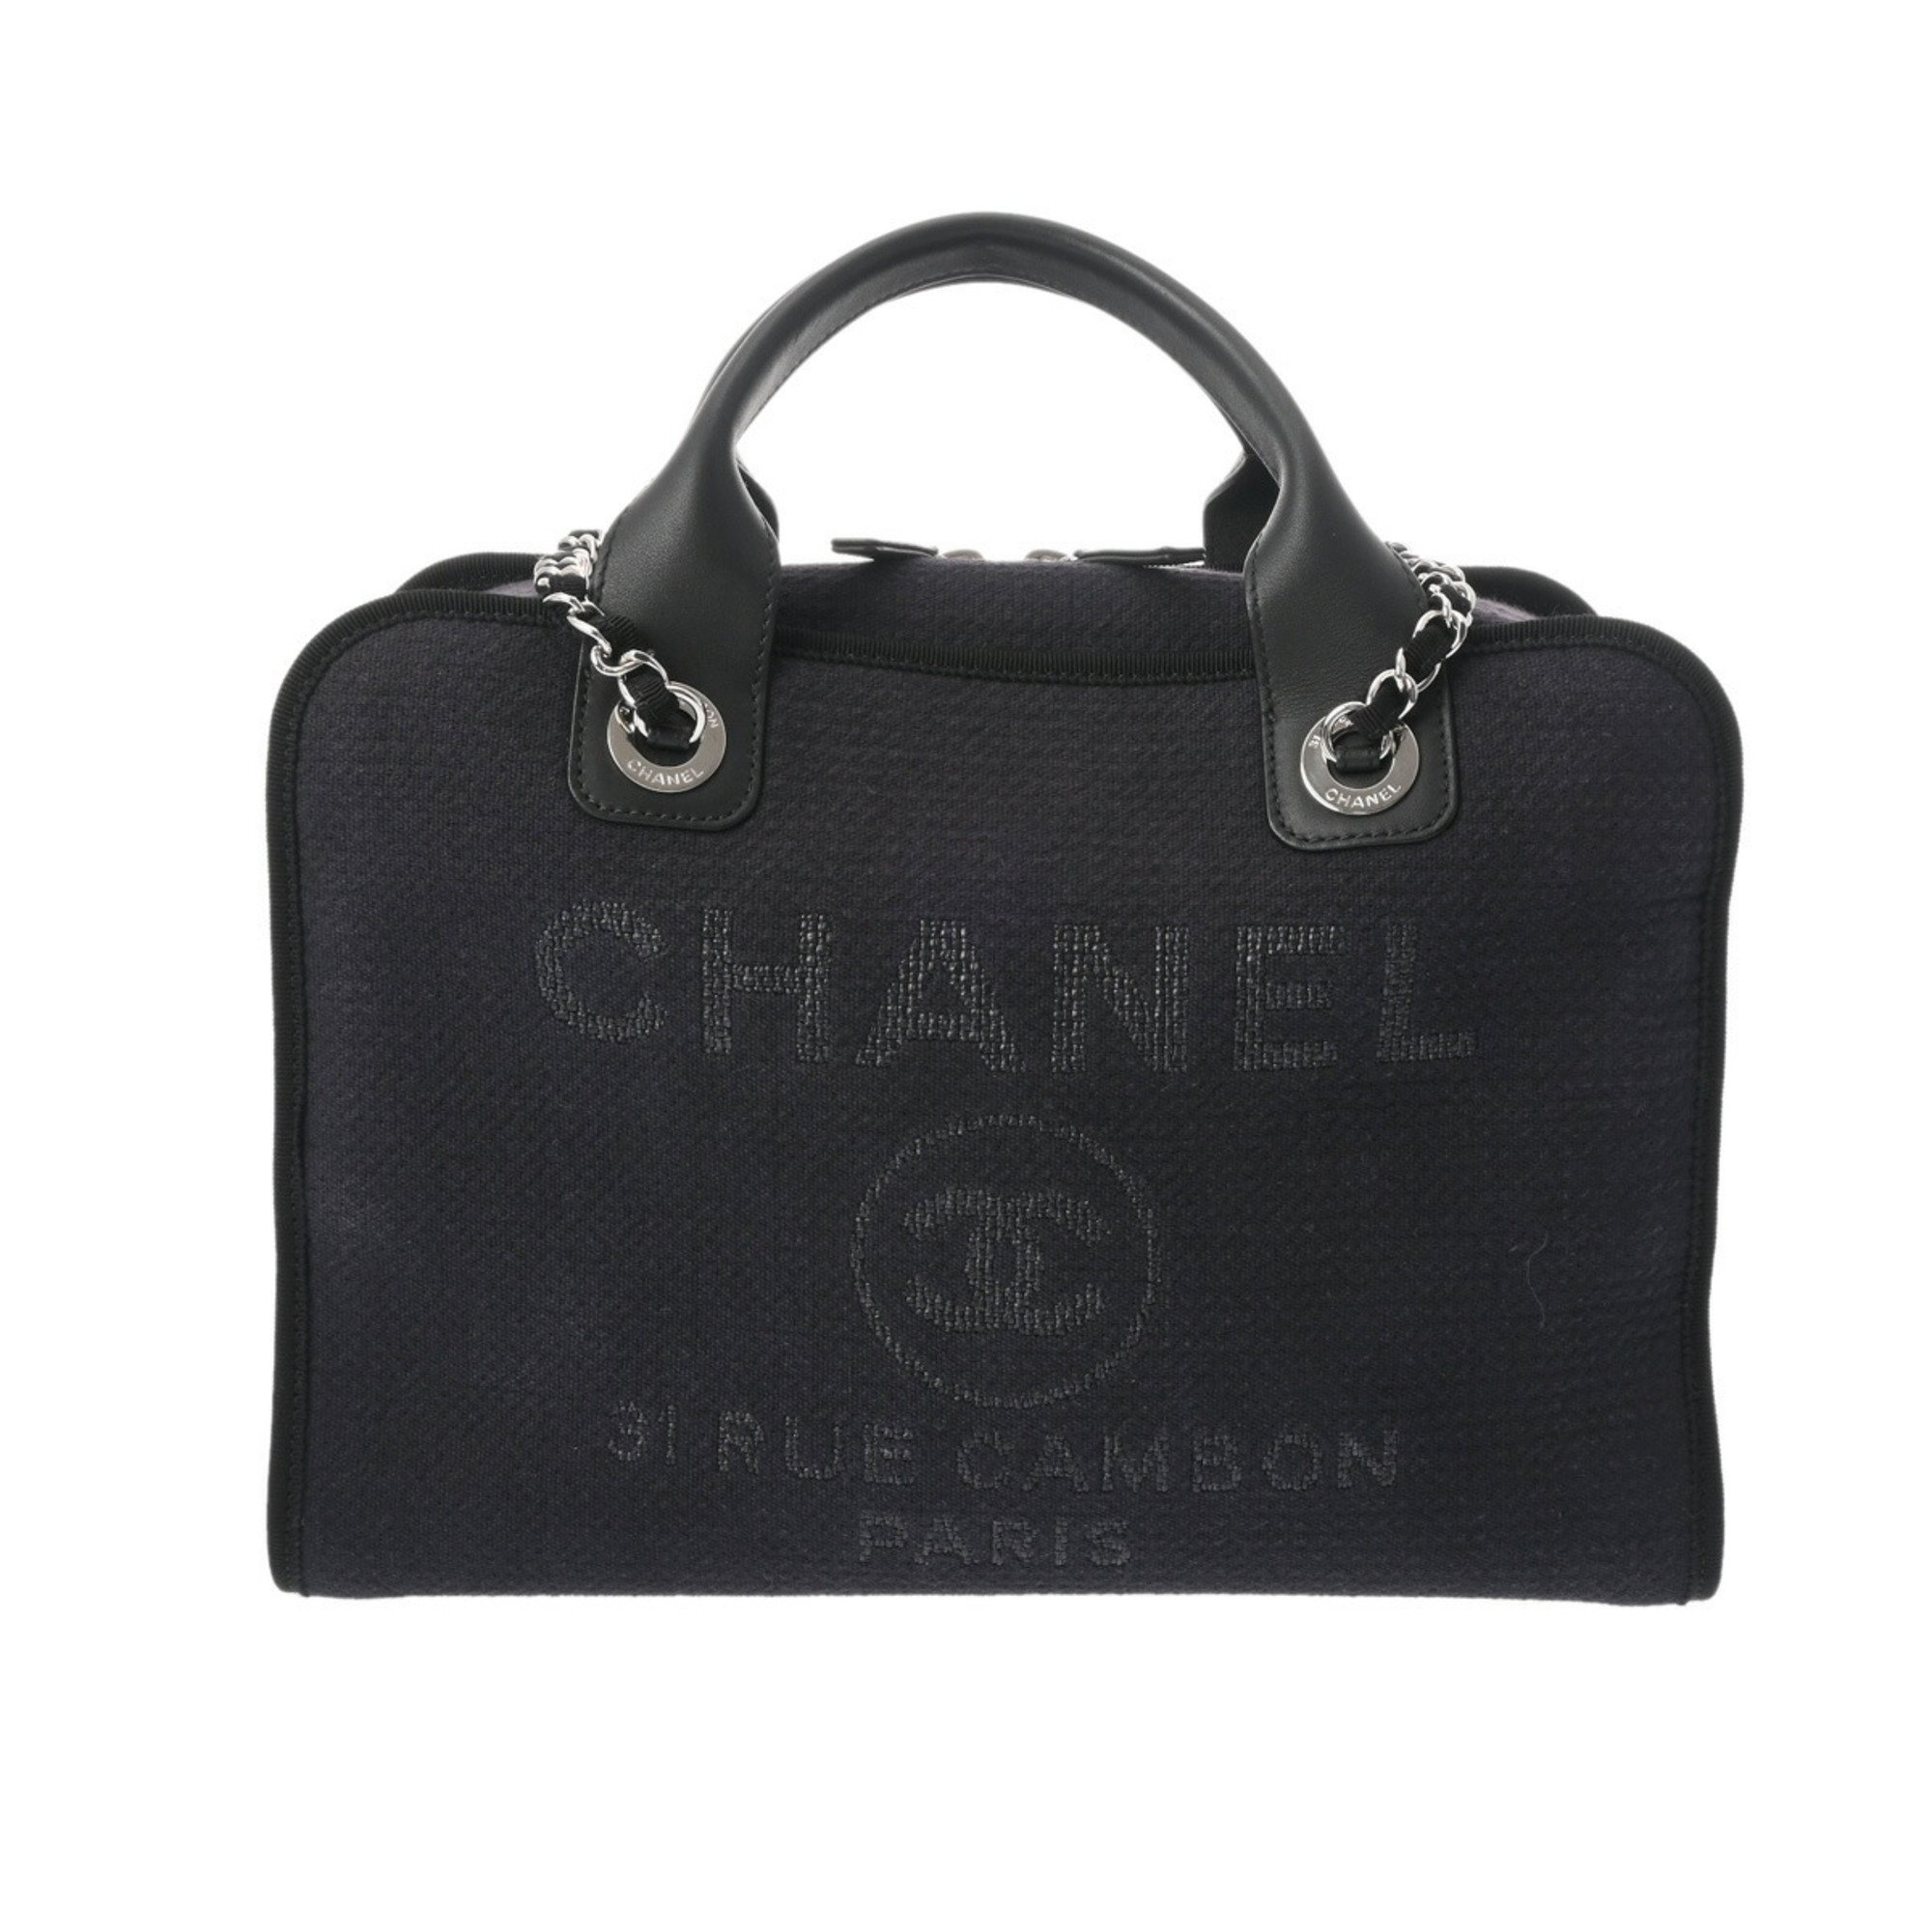 CHANEL Deauville Bowling Bag with Chain Shoulder Navy - Women's Canvas/Leather Handbag